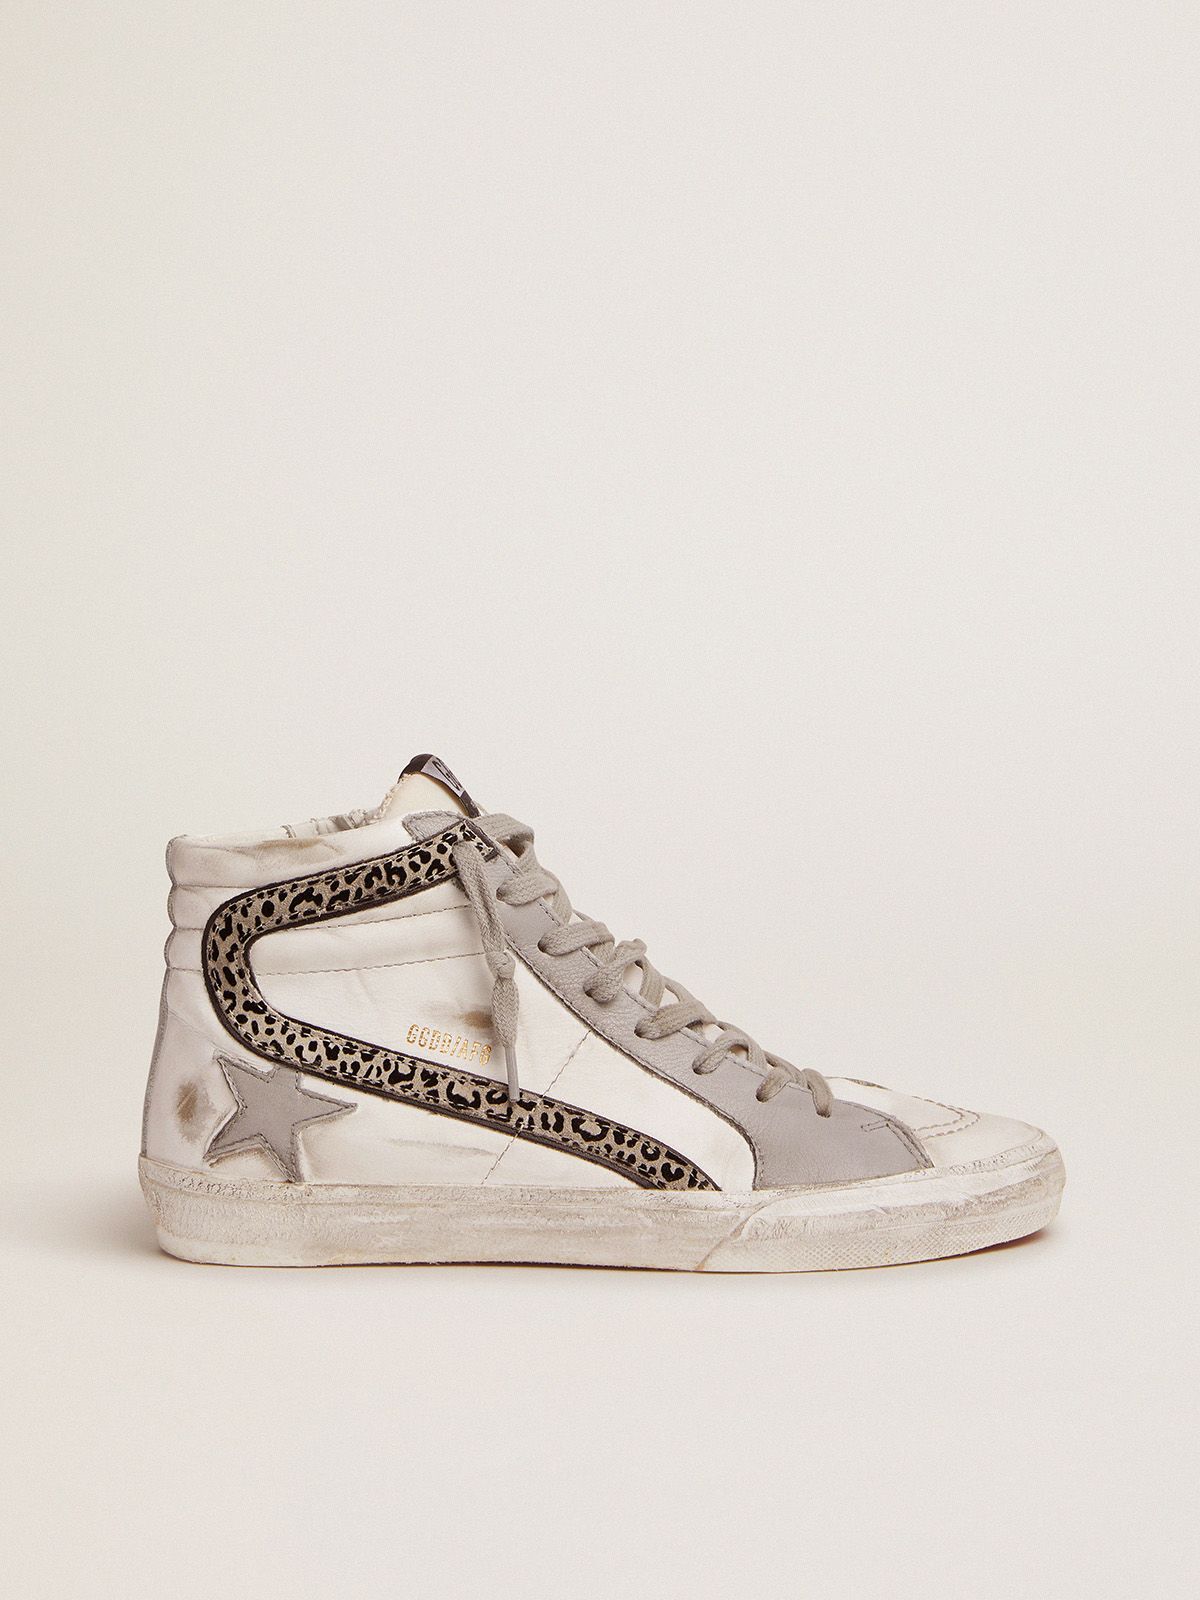 golden goose gray leather sneakers upper flash and white leopard-print Slide suede with